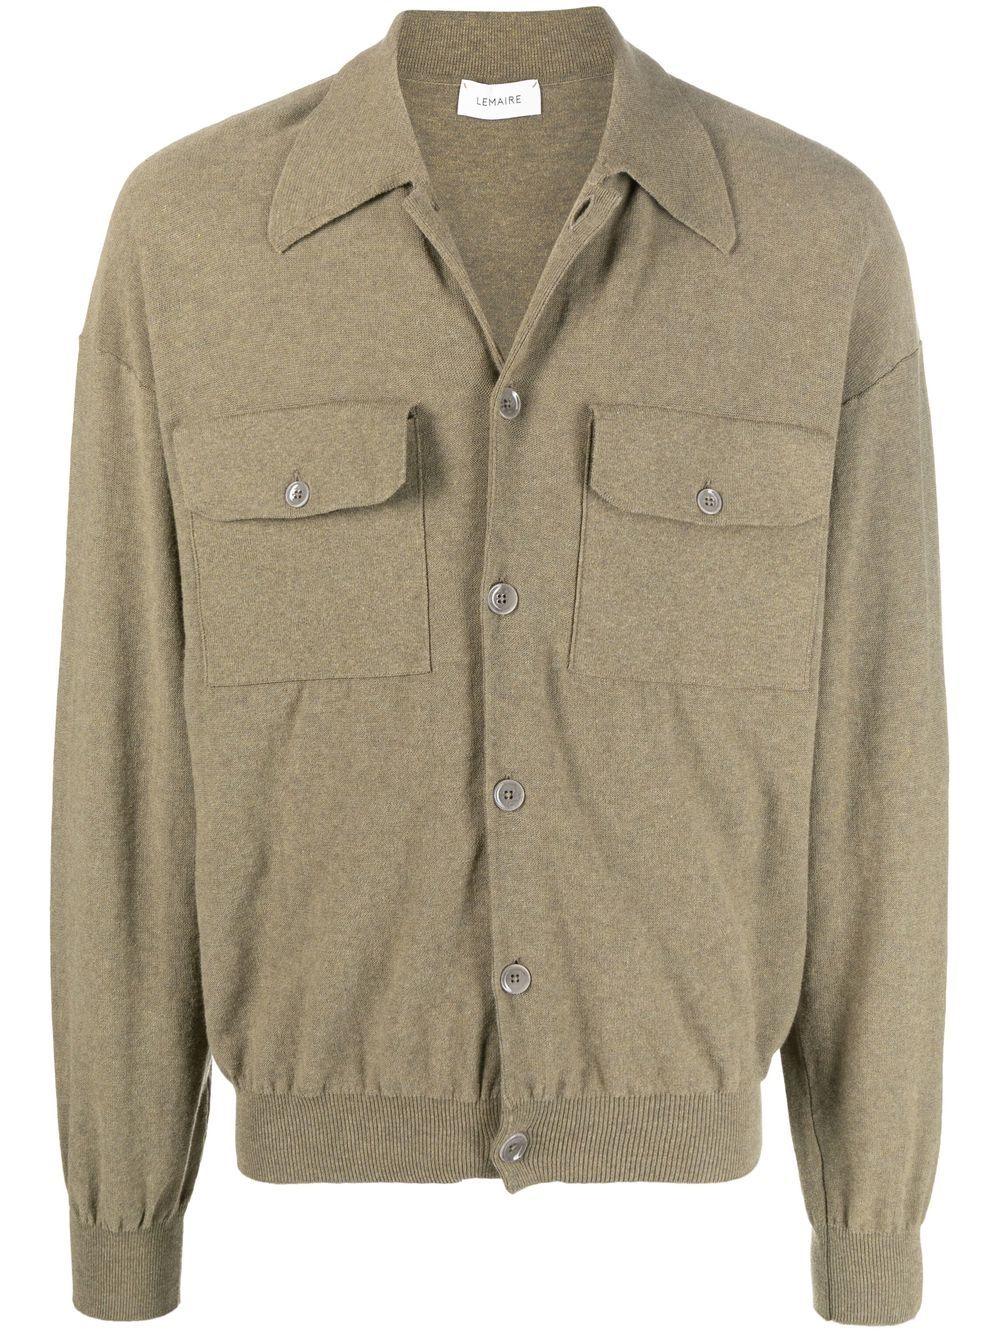 Lemaire button-down Knit Cardigan - Farfetch